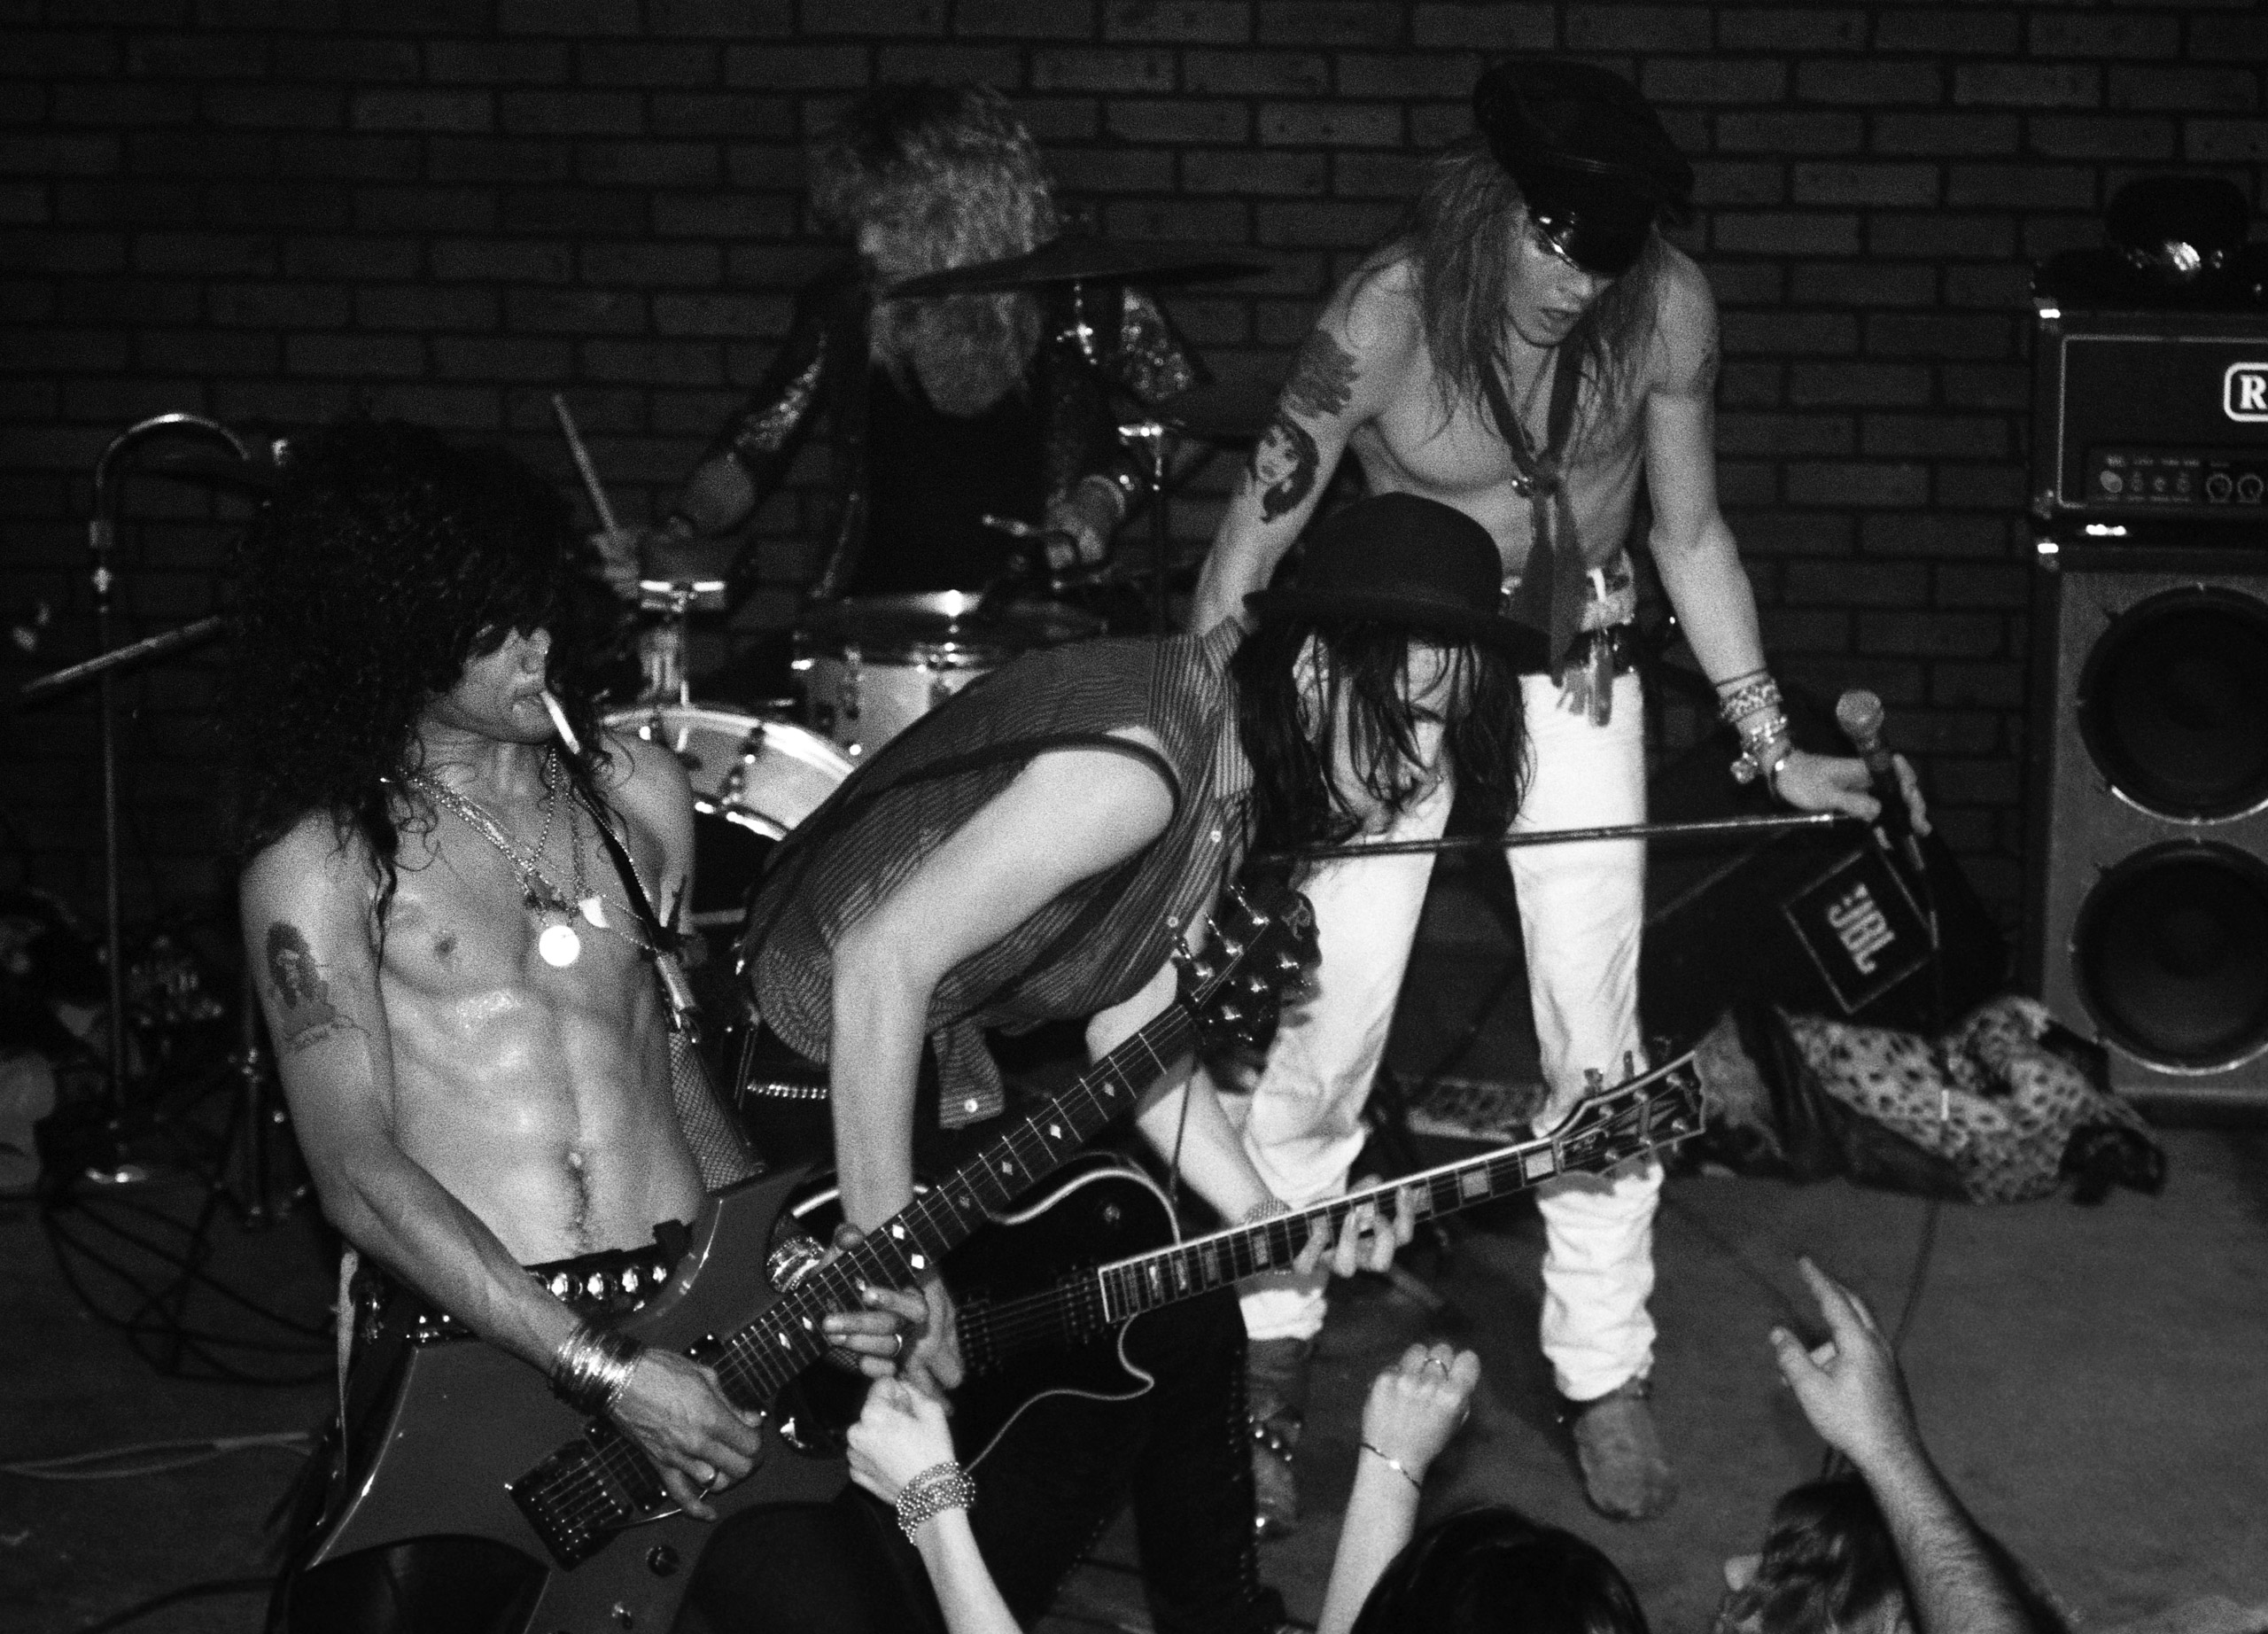 Slash, Steven Adler, Axl Rose and Izzy Stradlin of Guns n' Roses perform  at the Troubadour where they played 'Rocket Queen' for the first time on Sept. 20, 1985 in Los Angeles